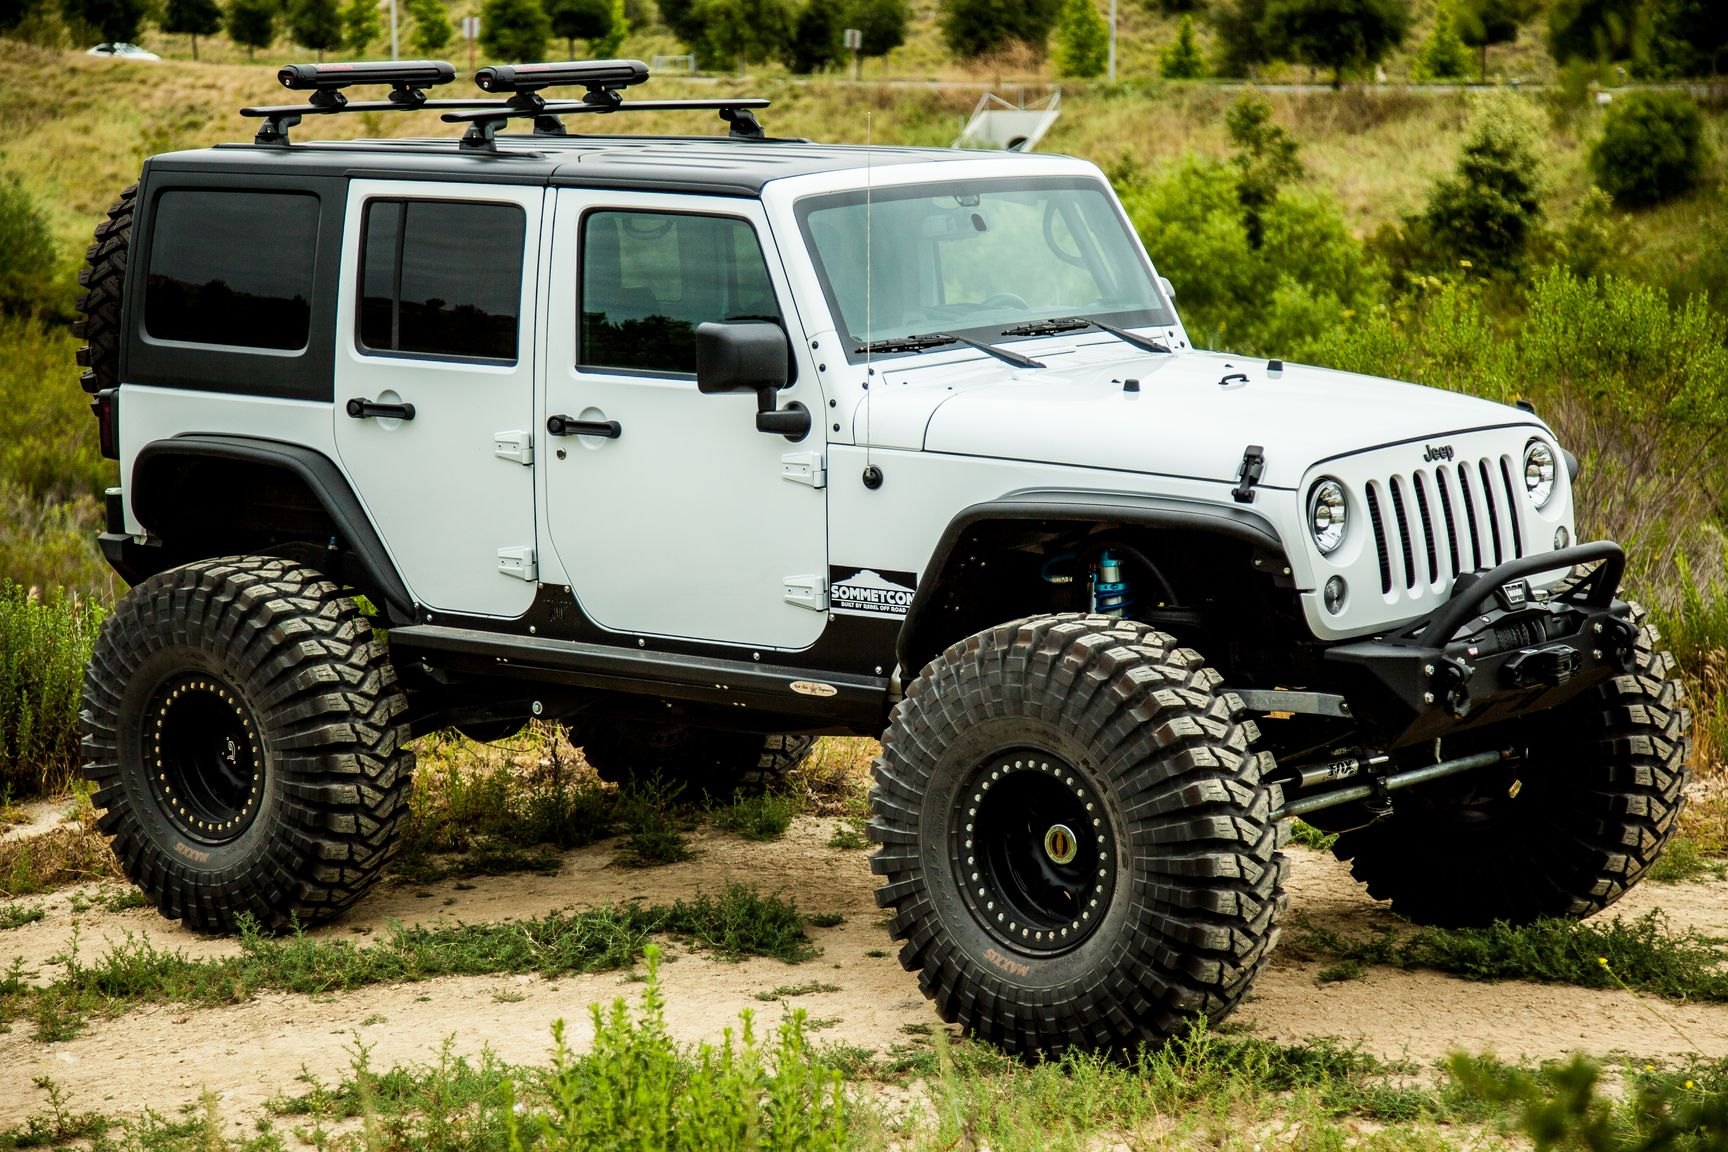 Jeeps Don't Get Better Prepared for Off-Roading Than this White Lifted ...